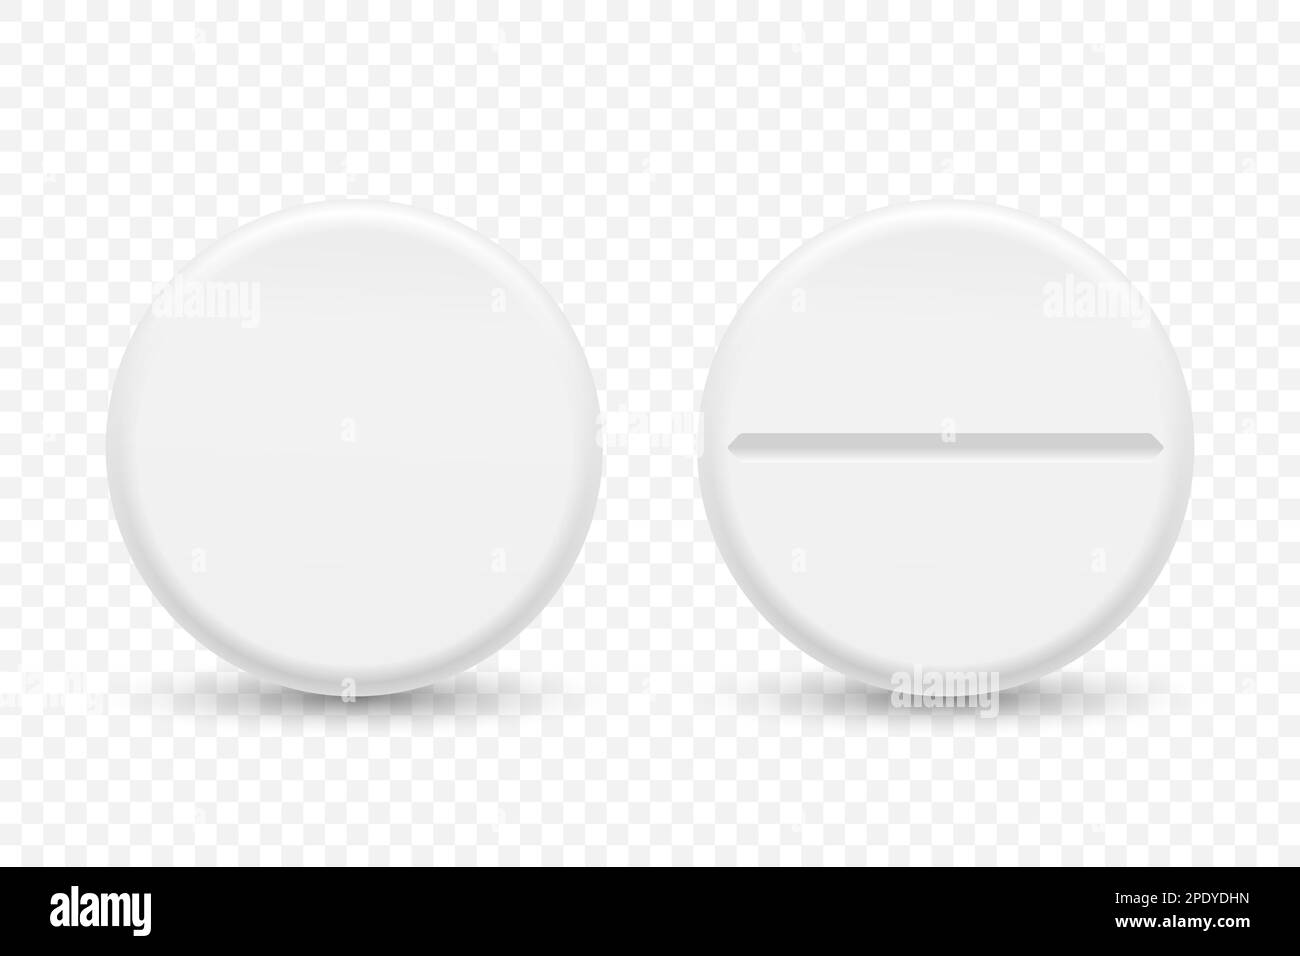 Vector 3d Realistic White Round Pharmaceutical Medical Pill, Capsule, Tablet Icon Set Closeup Isolated. Front View. Medicine, Health Concept Stock Vector